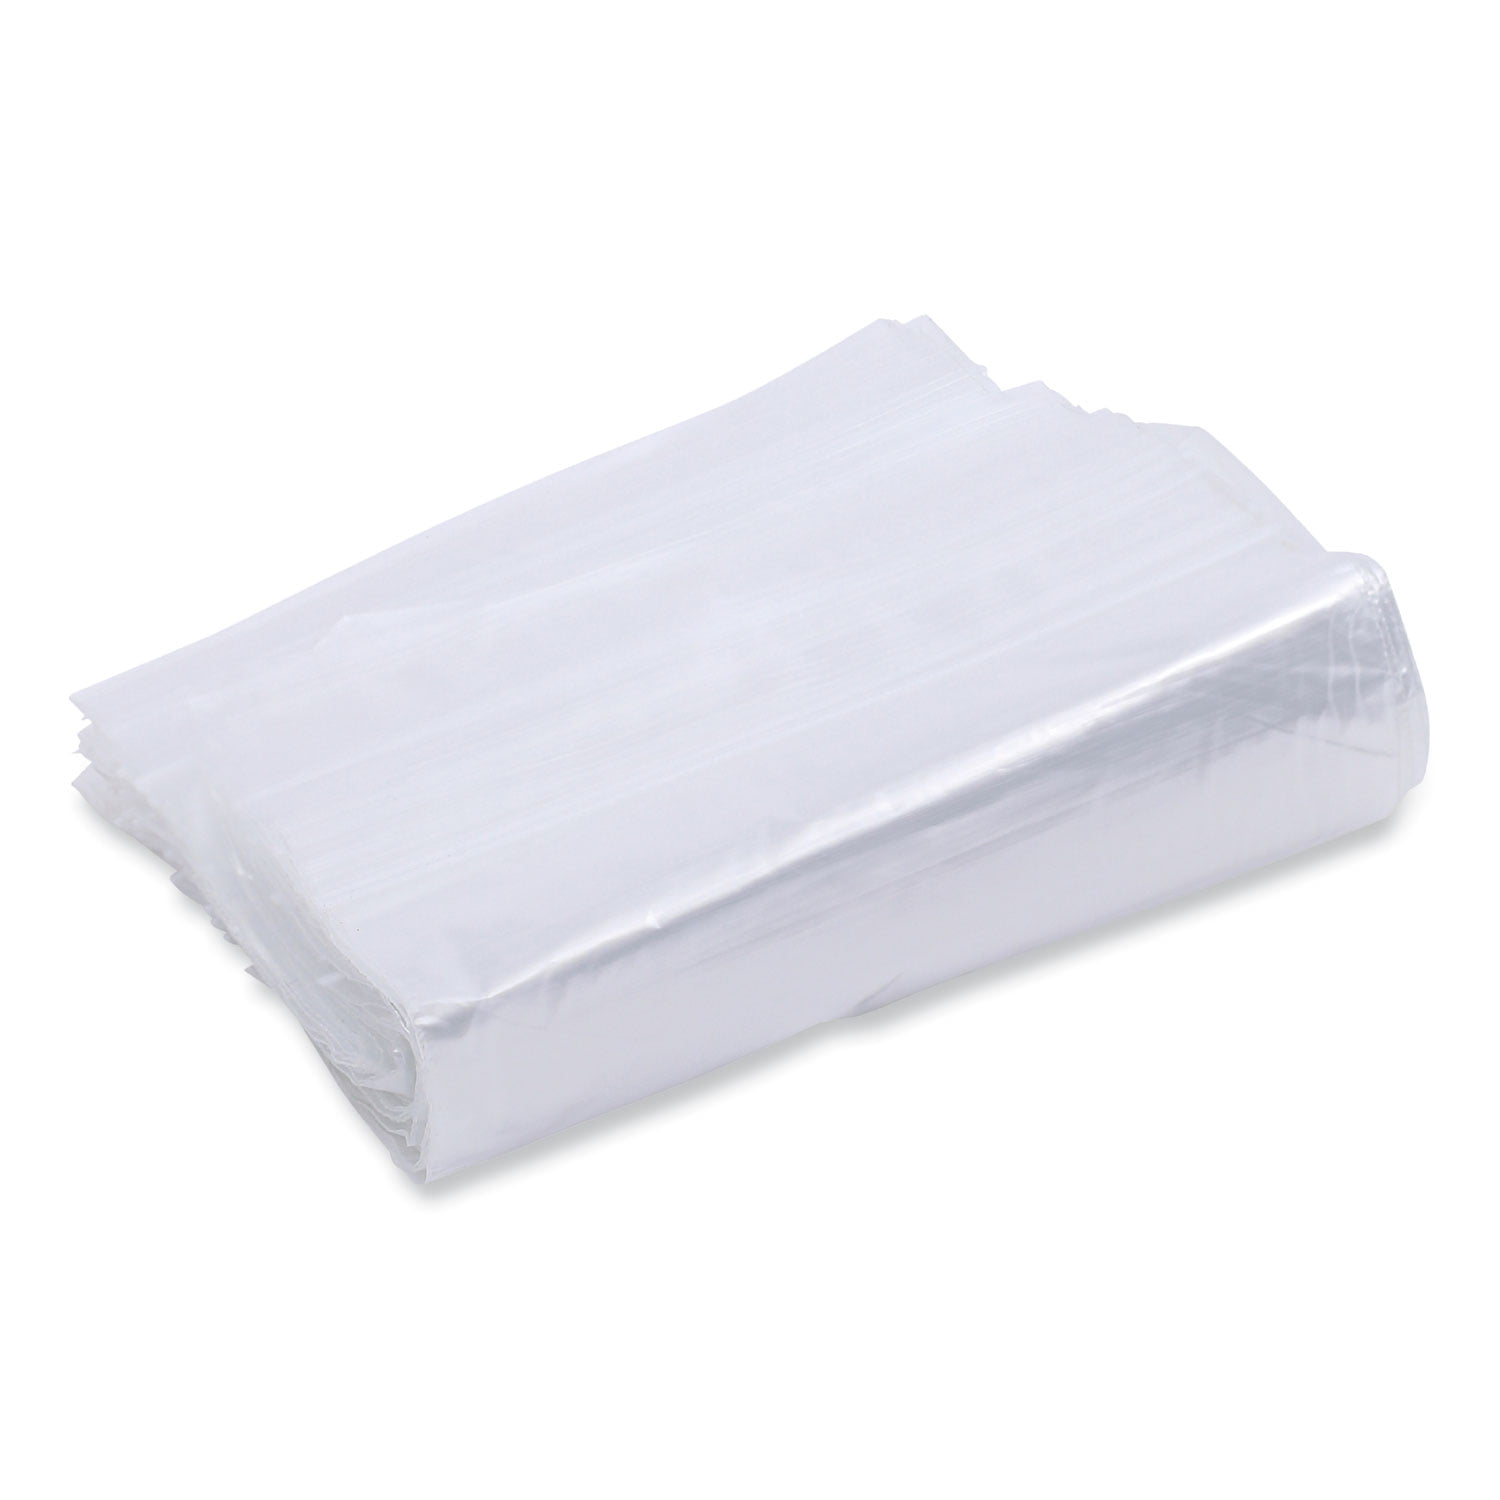 Ziploc Resealable Sandwich Bags Clear Box Of 500 Bags - Office Depot